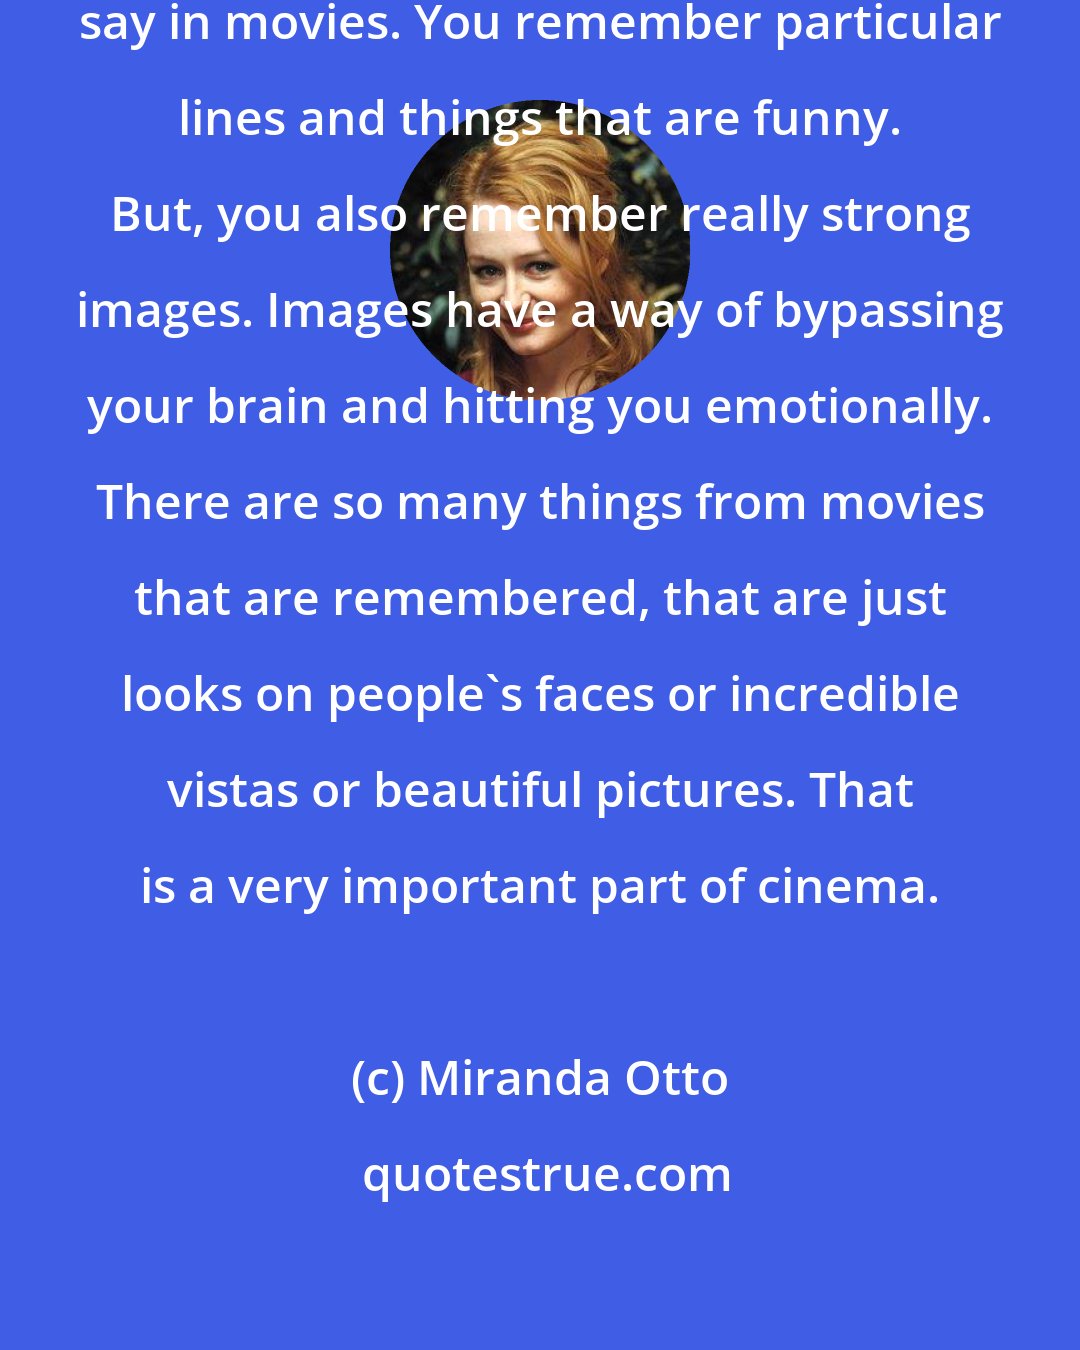 Miranda Otto: You do remember things that people say in movies. You remember particular lines and things that are funny. But, you also remember really strong images. Images have a way of bypassing your brain and hitting you emotionally. There are so many things from movies that are remembered, that are just looks on people's faces or incredible vistas or beautiful pictures. That is a very important part of cinema.